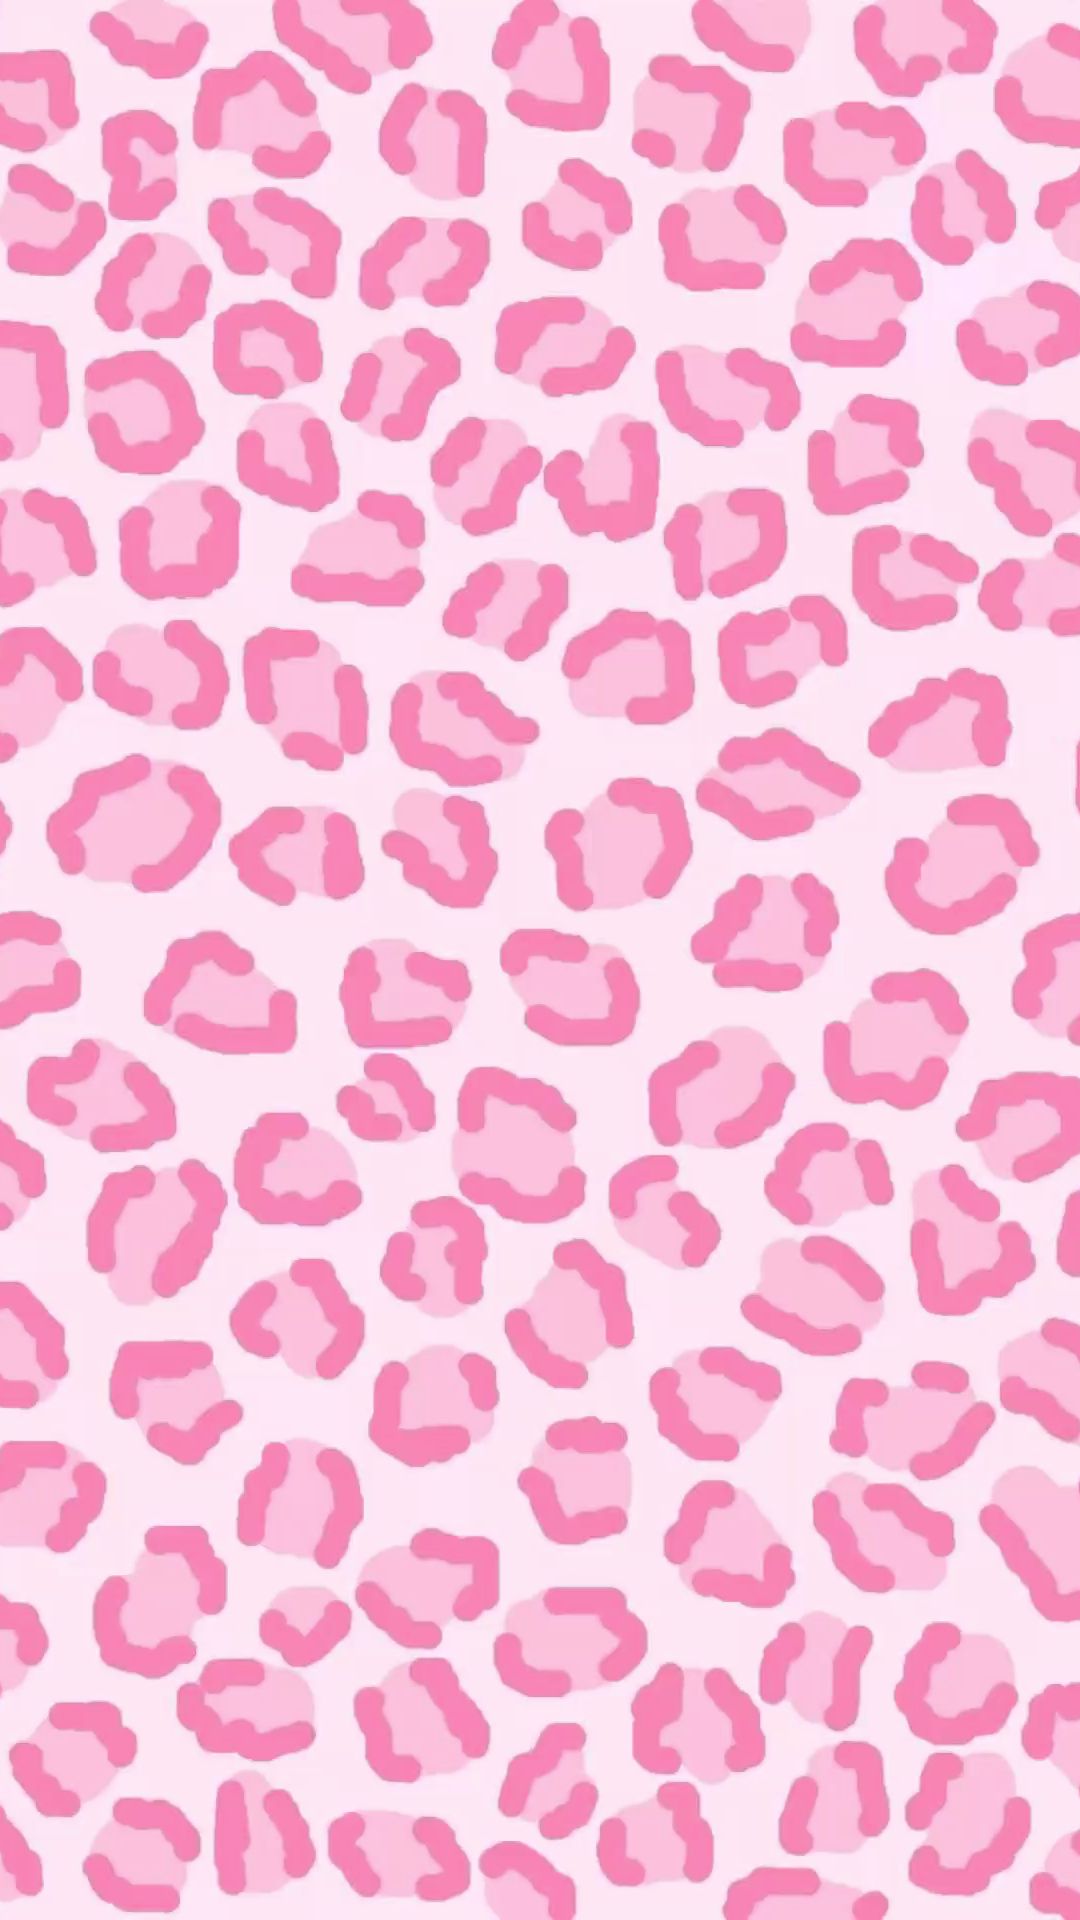 Pink leopard print iPhone wallpaper with high-resolution 1080x1920 pixel. You can use this wallpaper for your iPhone 5, 6, 7, 8, X, XS, XR backgrounds, Mobile Screensaver, or iPad Lock Screen - Preppy